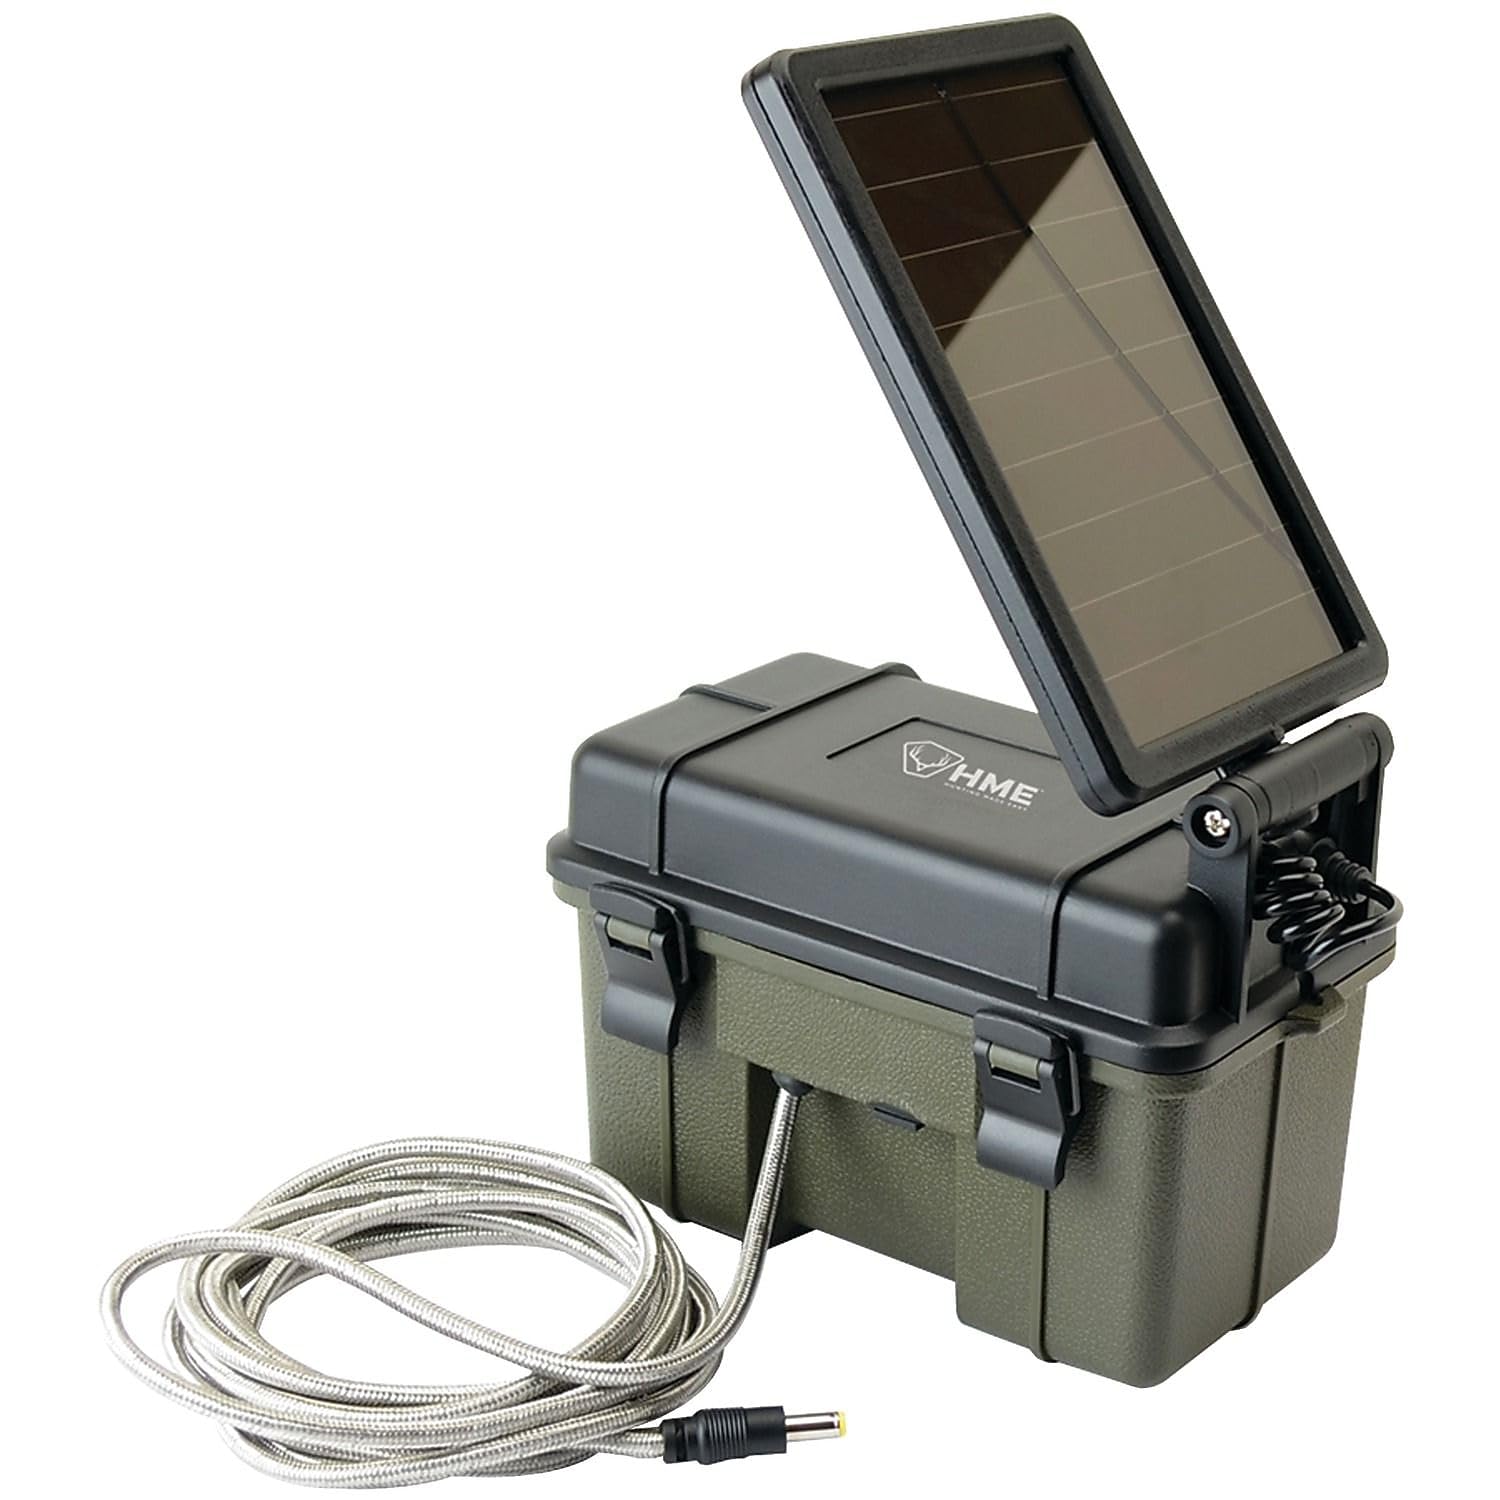 HME Trail Camera 12V/Solar Auxiliary Power Pack Durable Weather-Resistant Housing  $45.09 + Free Shipping